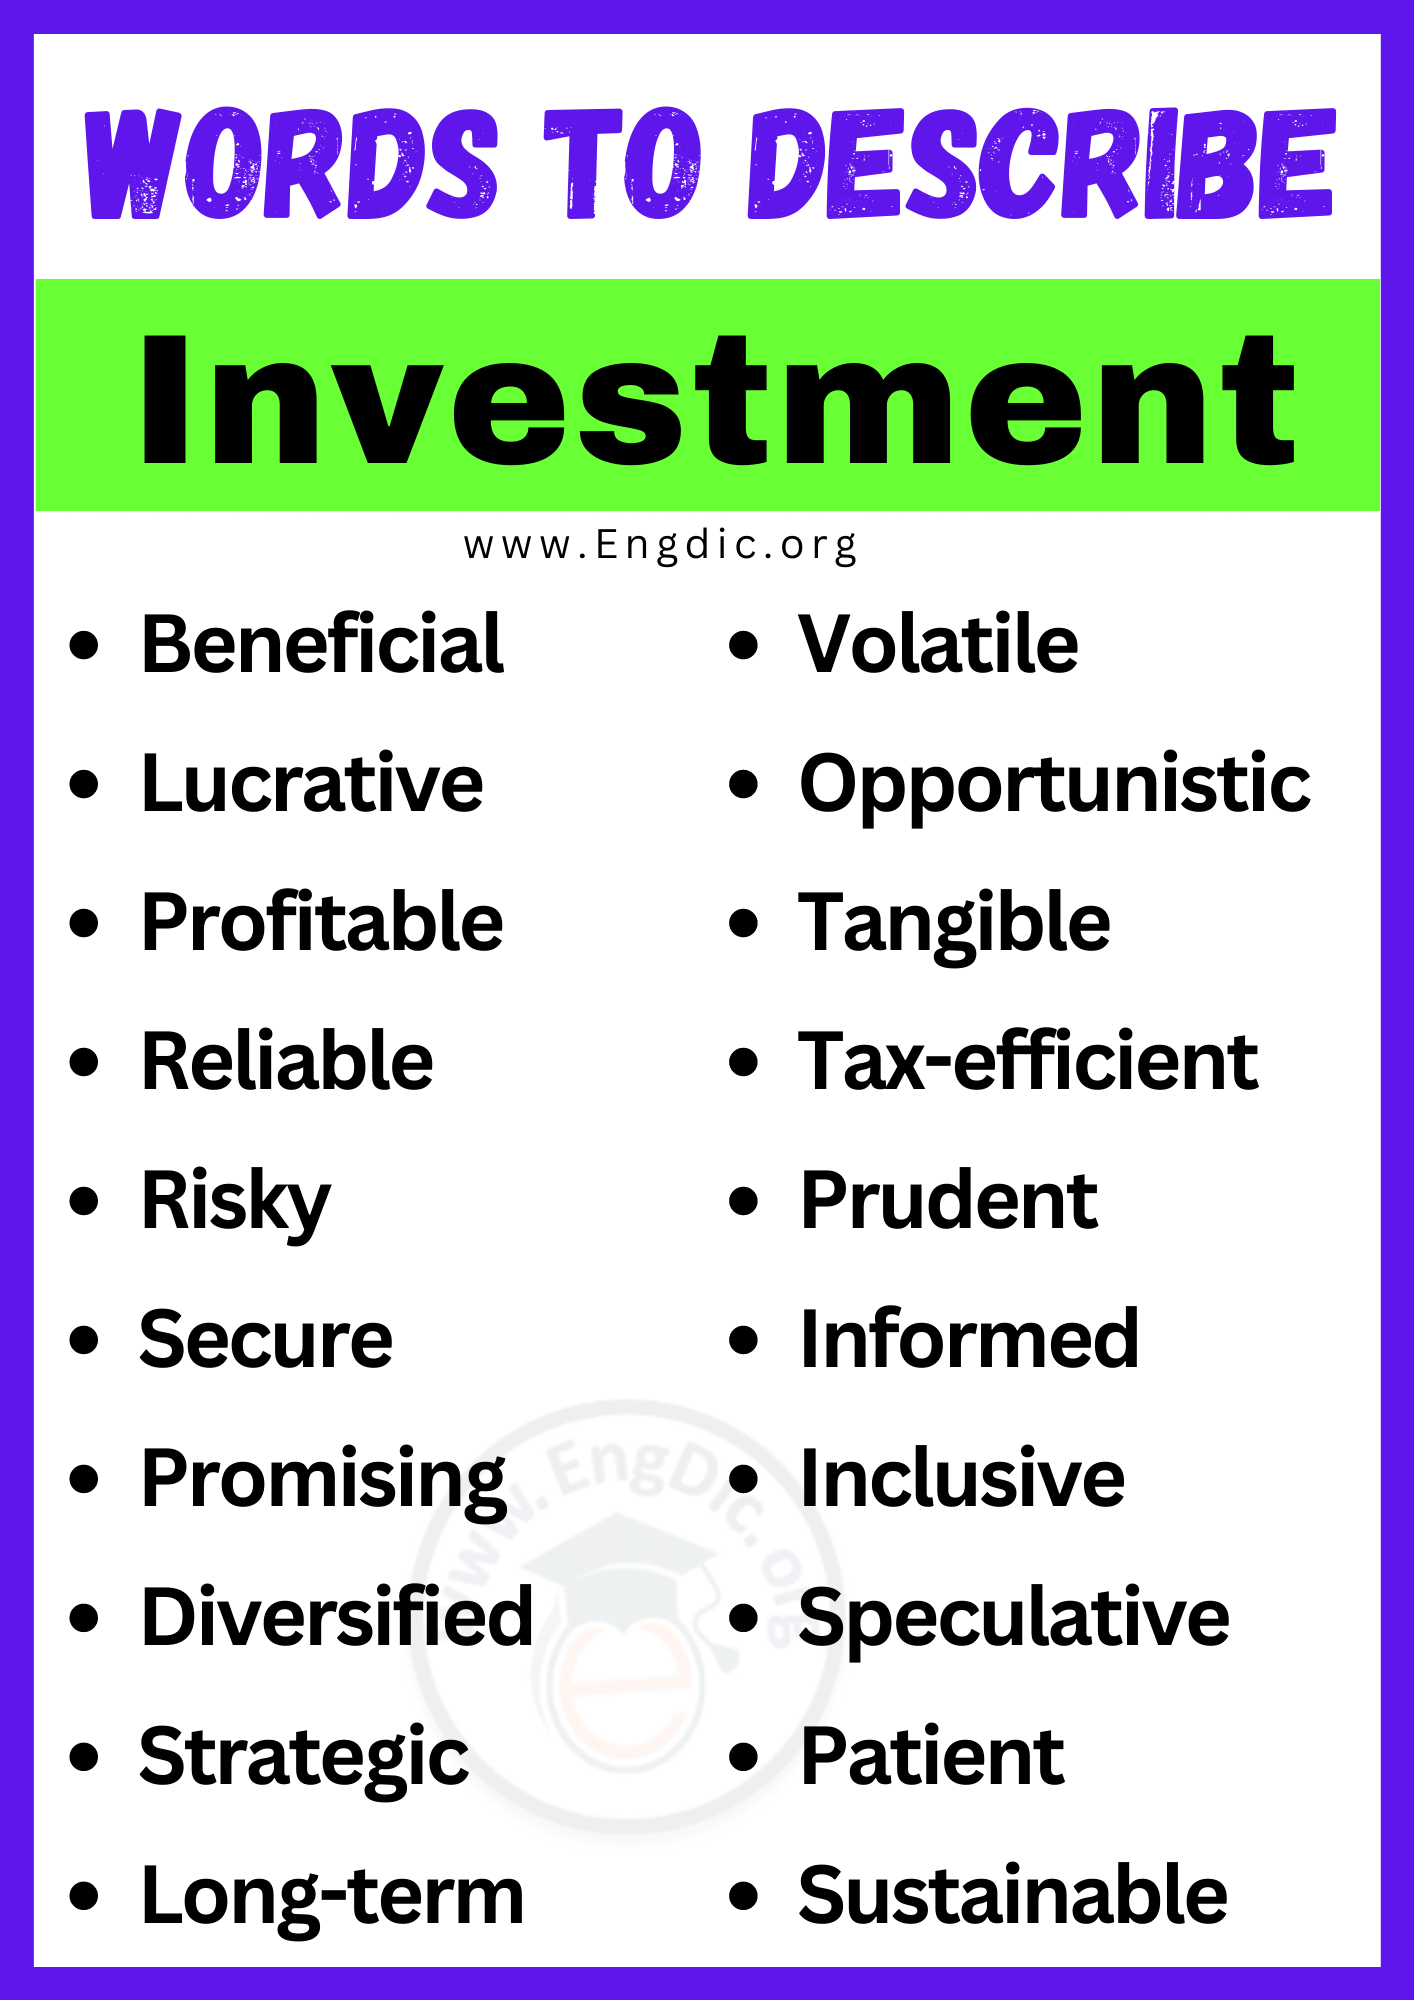 Words to Describe Investment